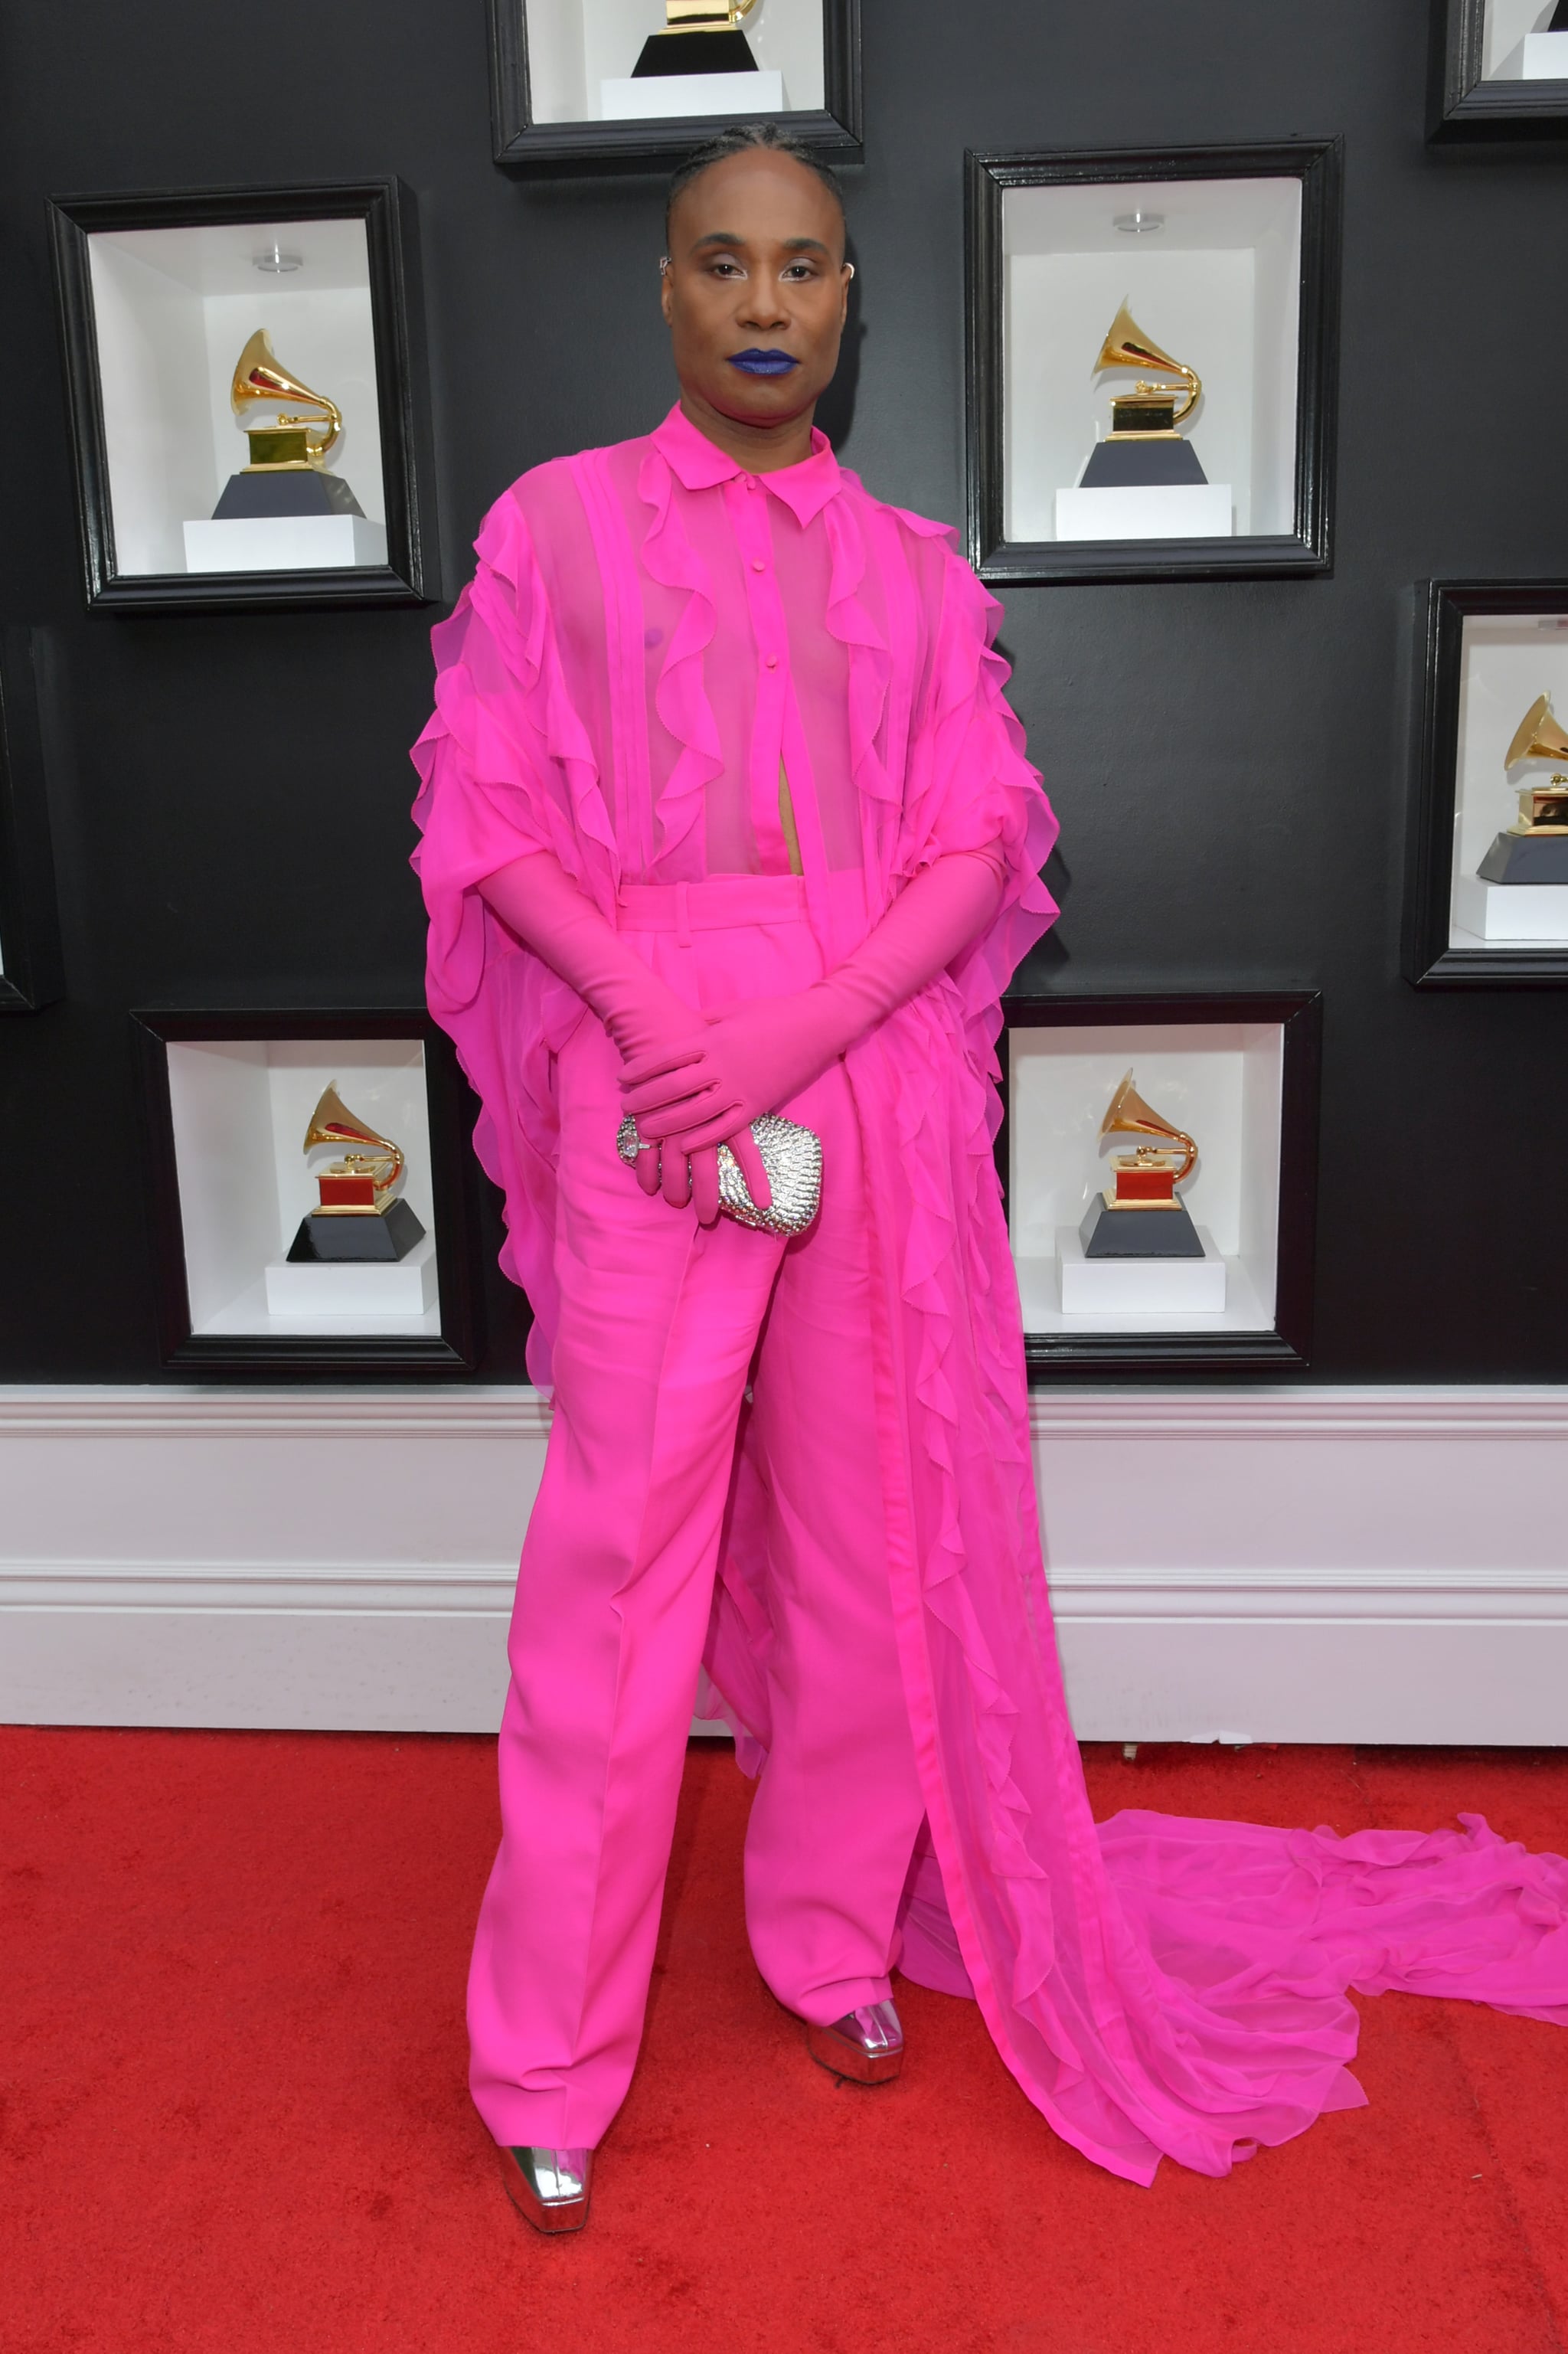 Billy Porter Wearing Gloves at the 2022 Grammys | Opera Gloves Are the Accessory of Choice at the 2022 Grammys | POPSUGAR Fashion Photo 7